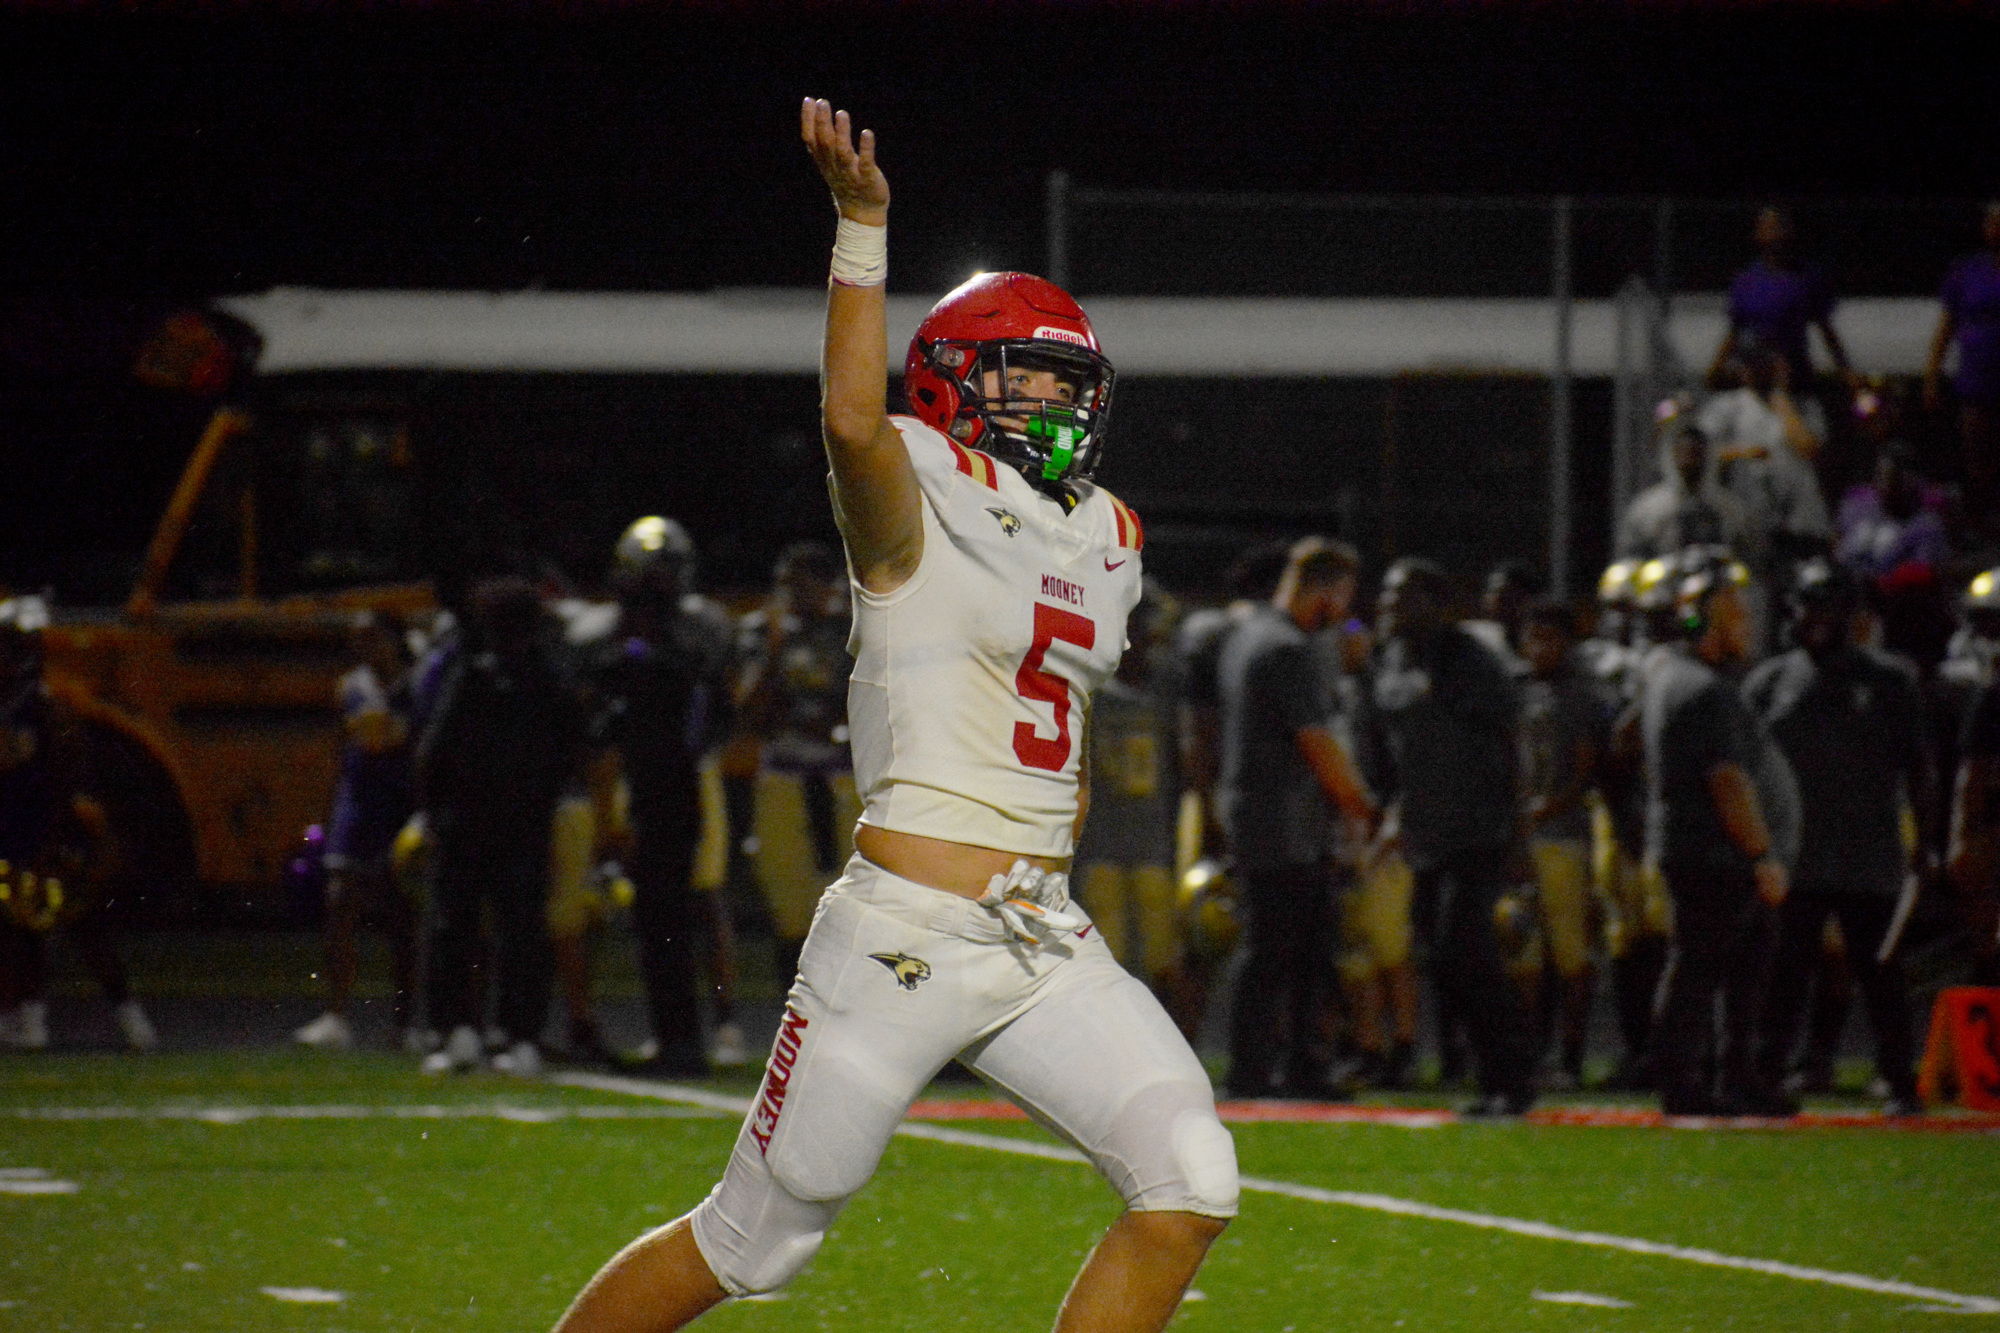 Mooney junior George Leibold celebrates a win over Booker High. (File photo.)